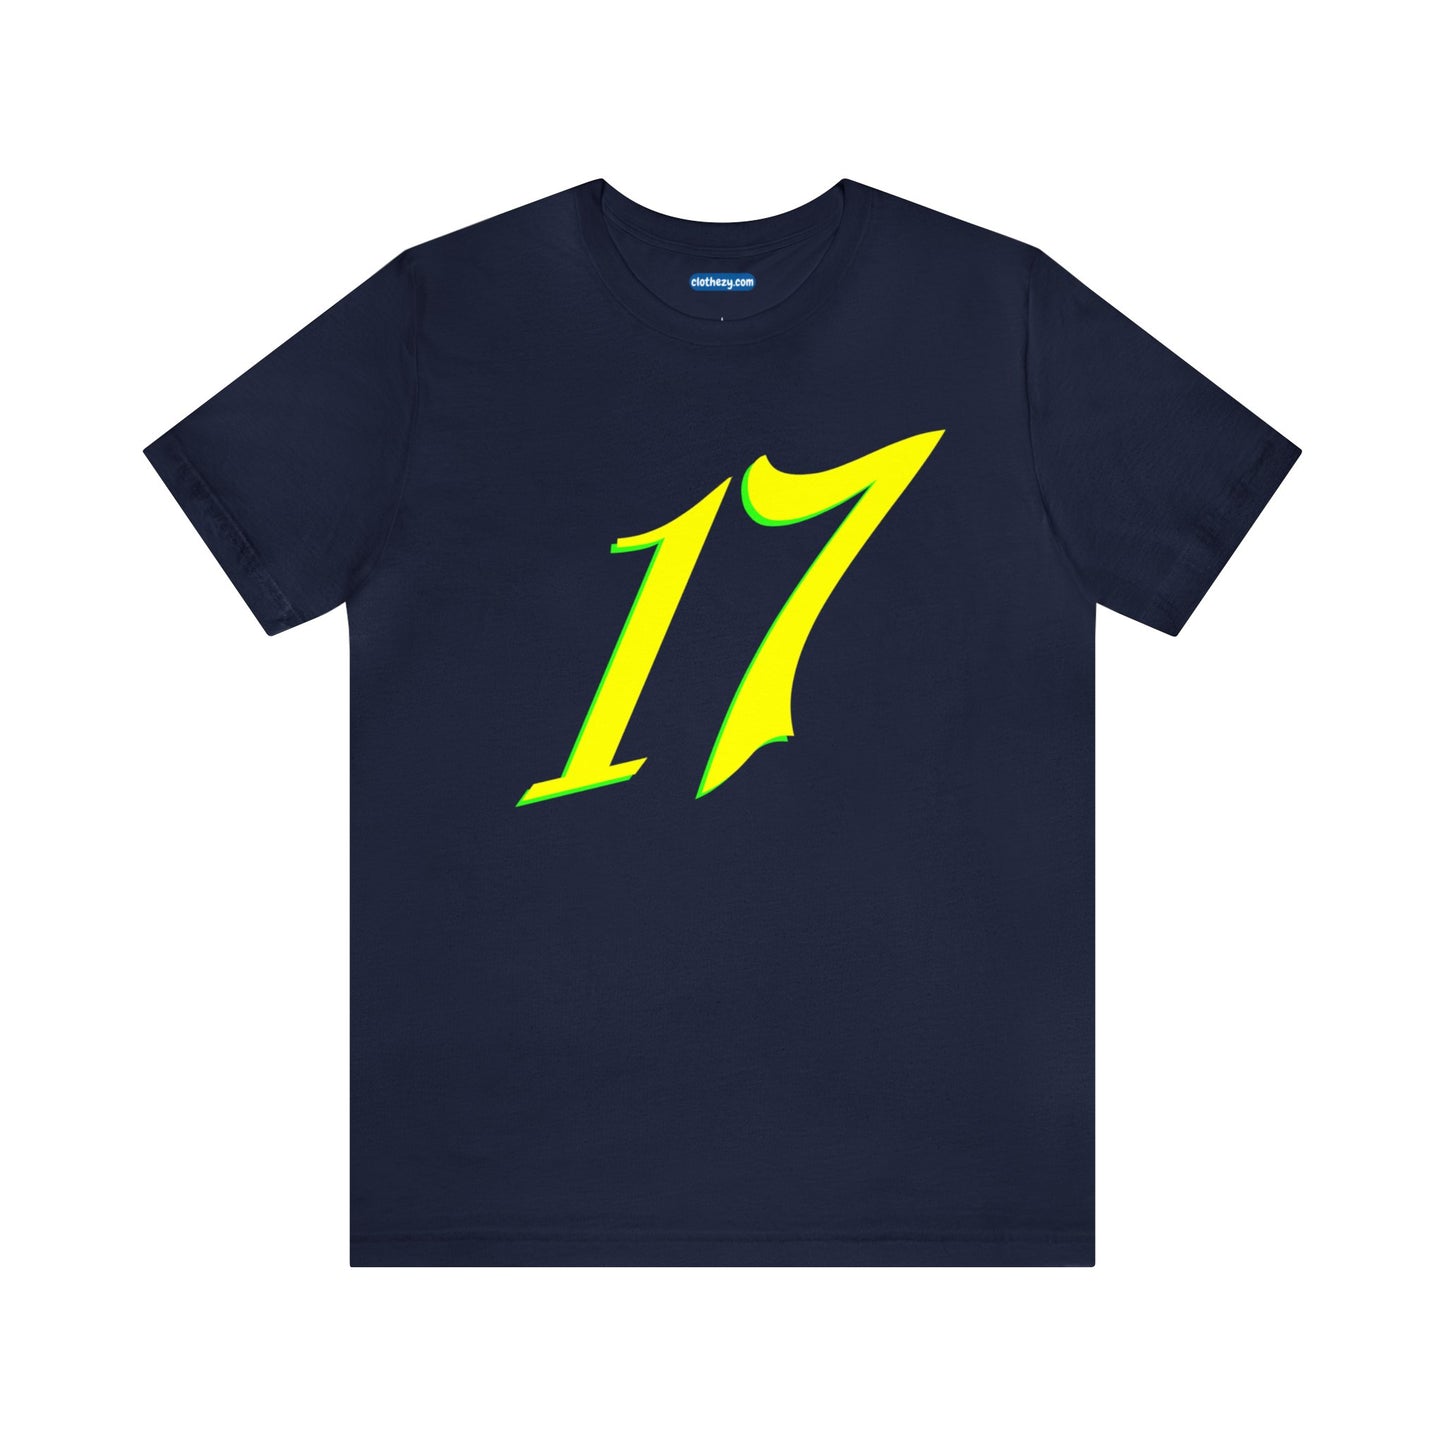 Number 17 Design - Soft Cotton Tee for birthdays and celebrations, Gift for friends and family, Multiple Options by clothezy.com in Orange Size Small - Buy Now